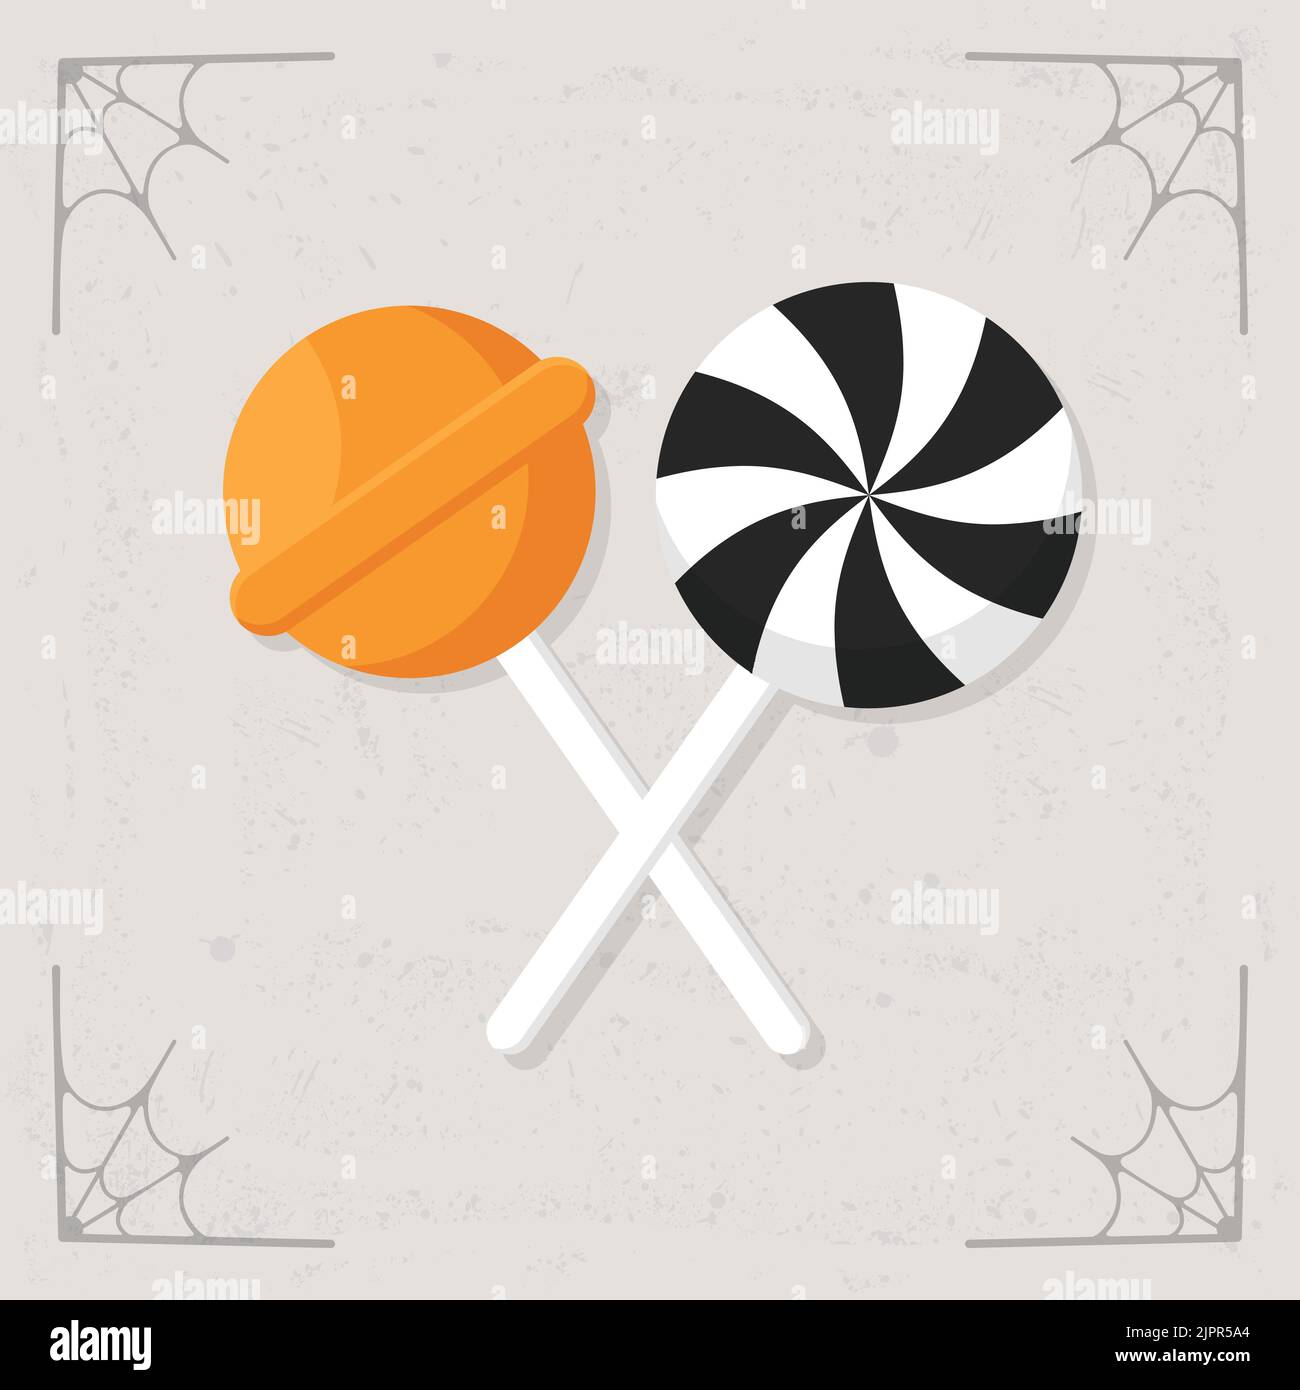 Halloween candy icon. Sweet spooky lollipop sugar caramel on stick. Halloween illustration isolated on stylized gray background. Vector illustration Stock Vector